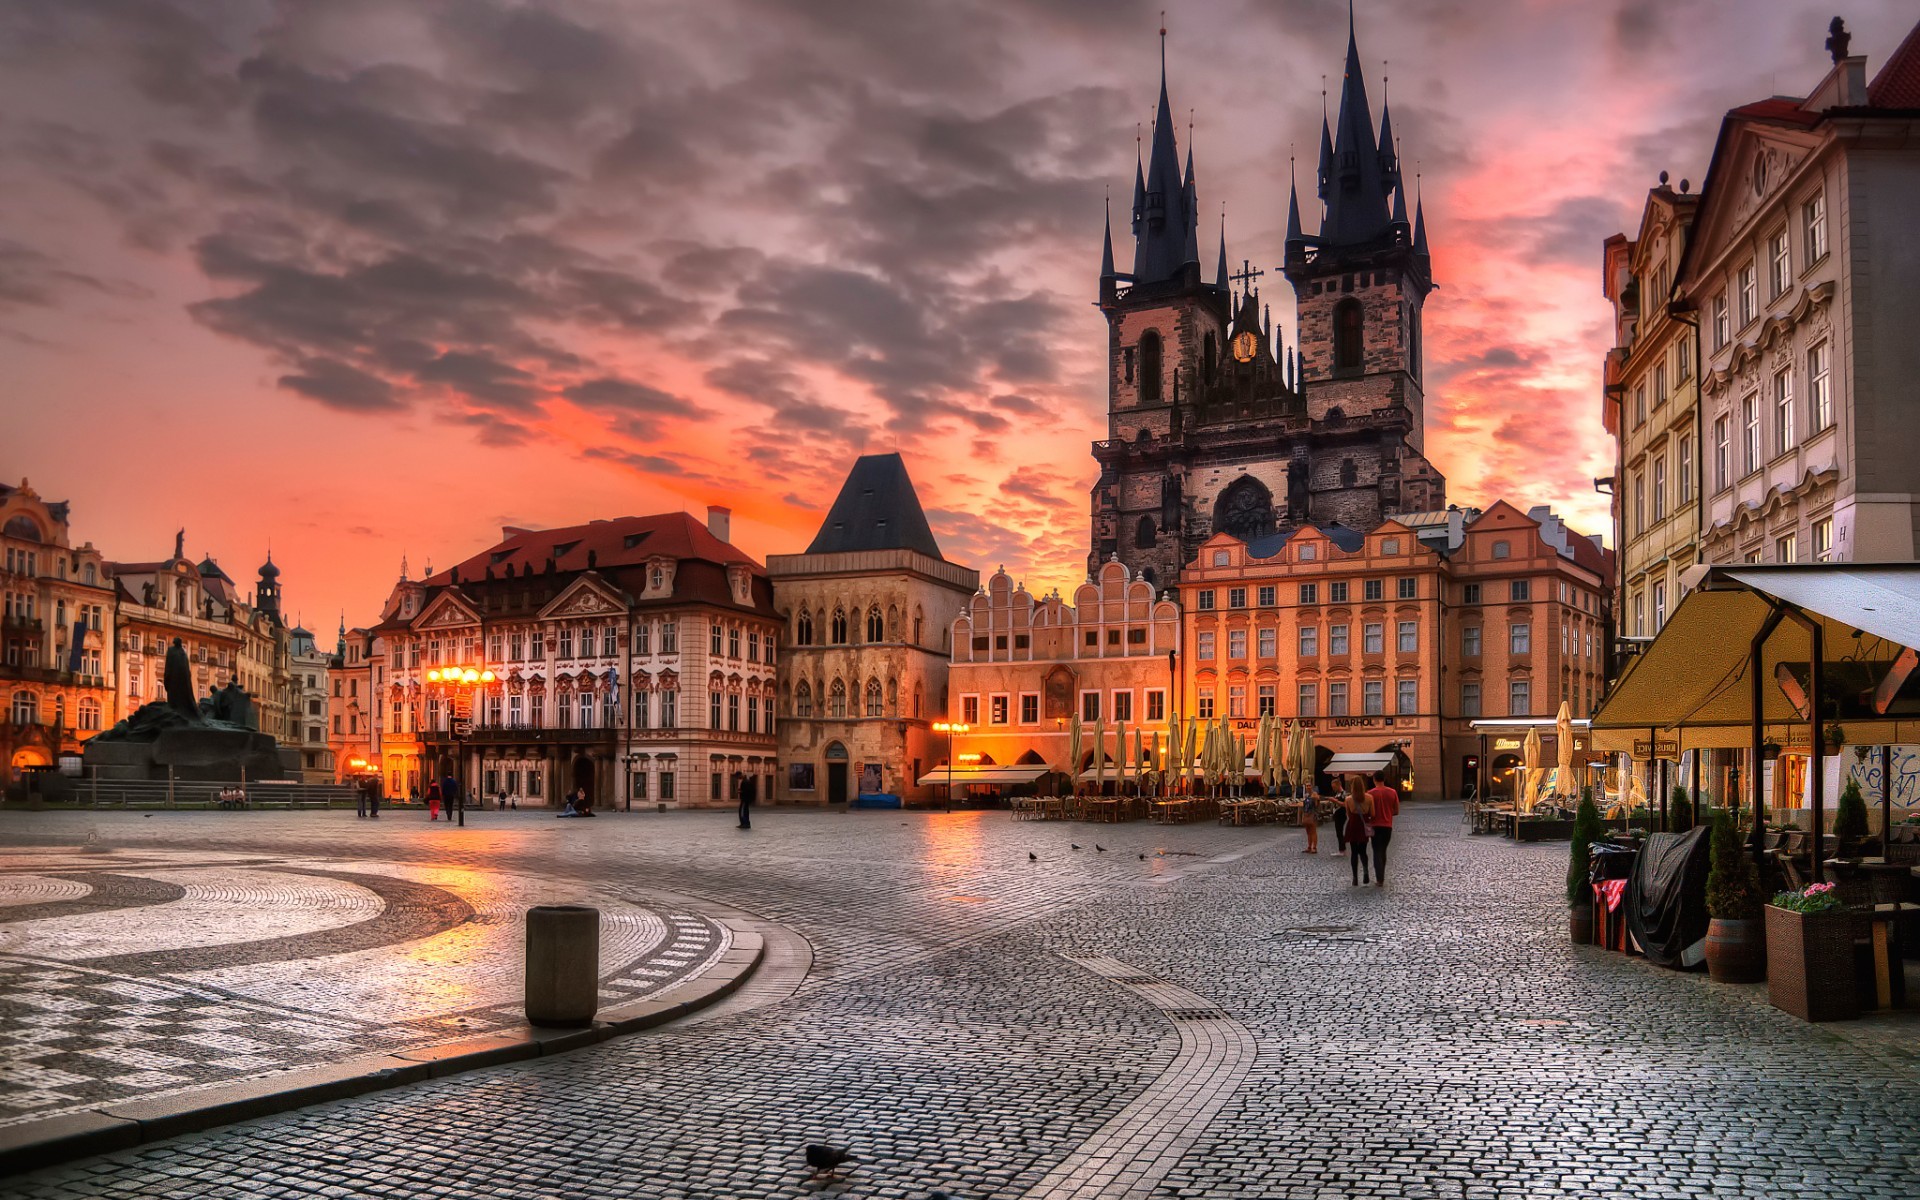 General 1920x1200 architecture building evening lights cityscape clouds Prague Czech Republic house town square old building sunset cafe people HDR cathedral statue history Church of Our Lady before Týn